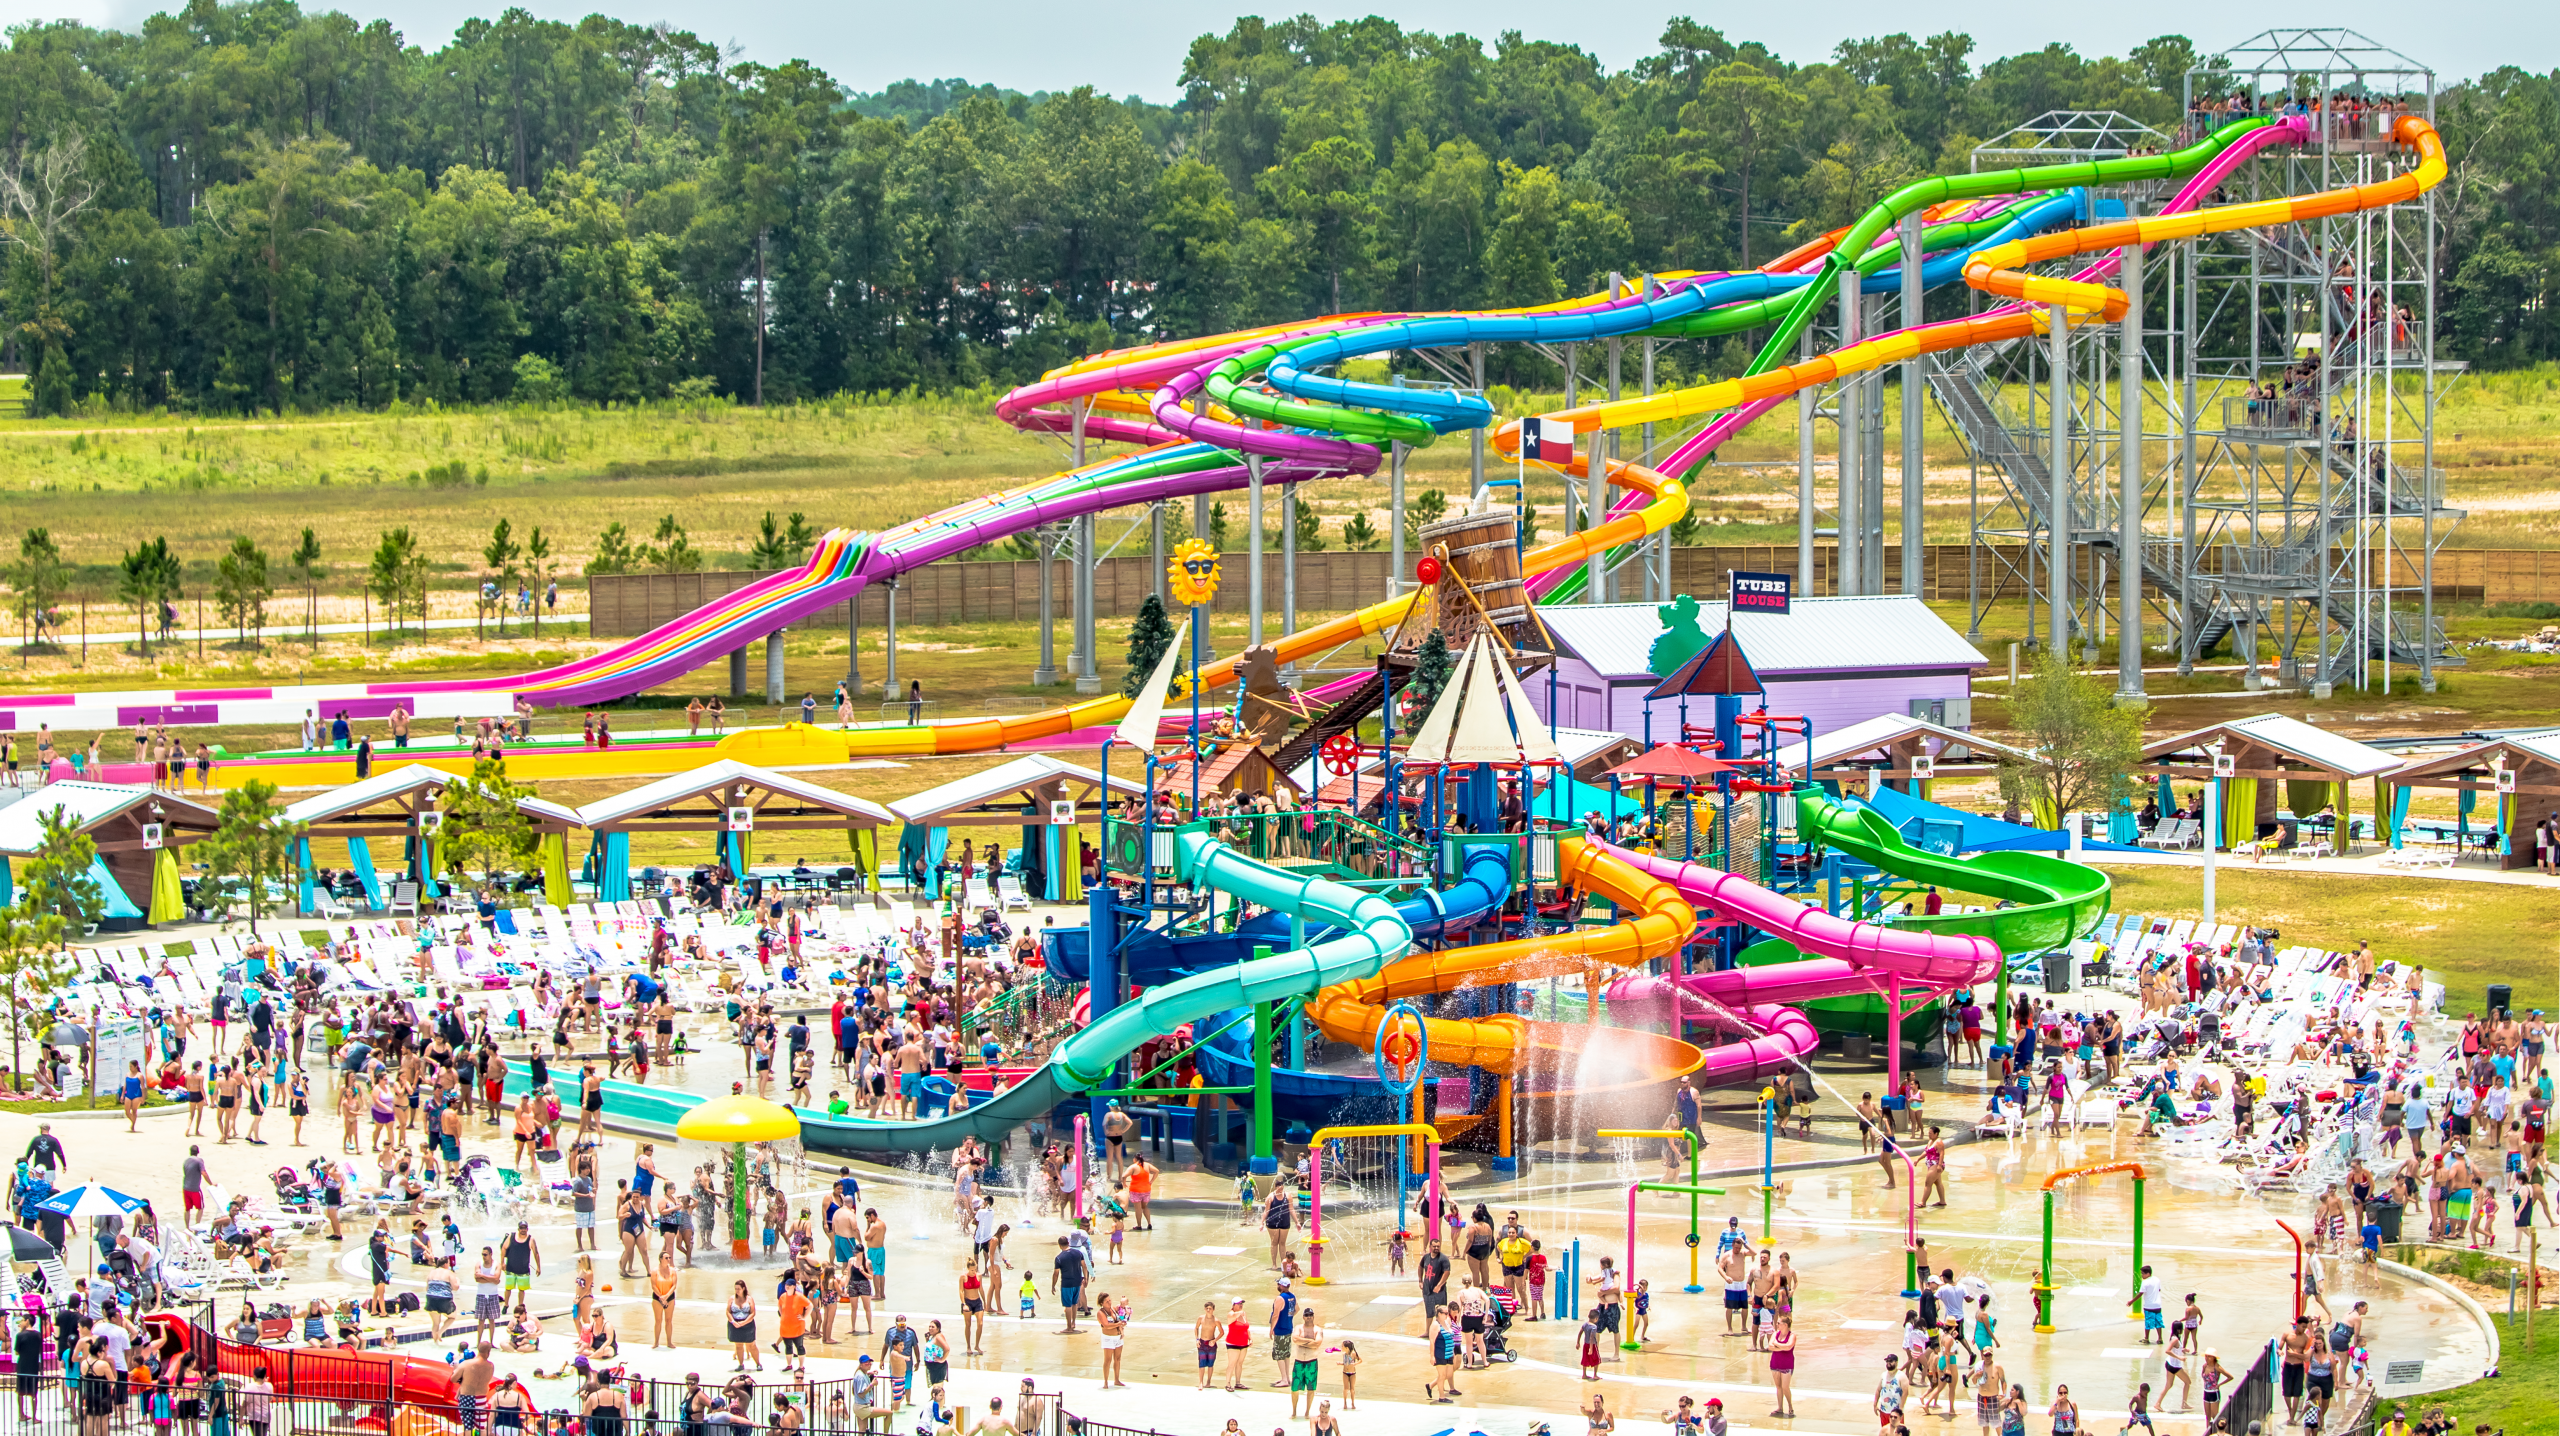 Whizzard, Big Rivers Waterpark & Adventures New Caney, USA